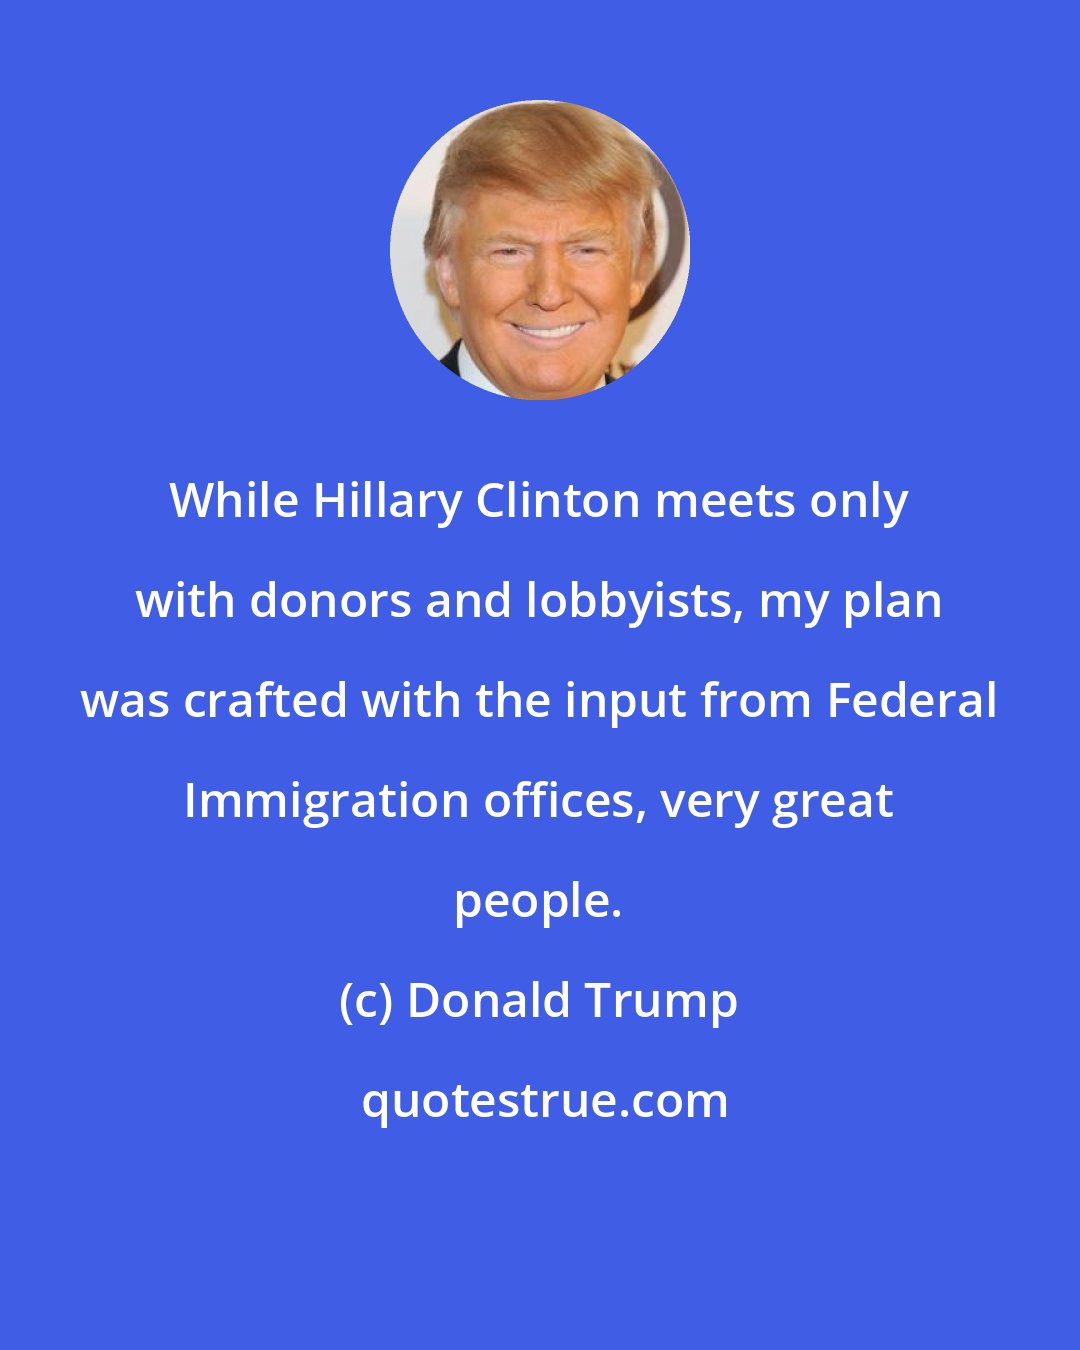 Donald Trump: While Hillary Clinton meets only with donors and lobbyists, my plan was crafted with the input from Federal Immigration offices, very great people.